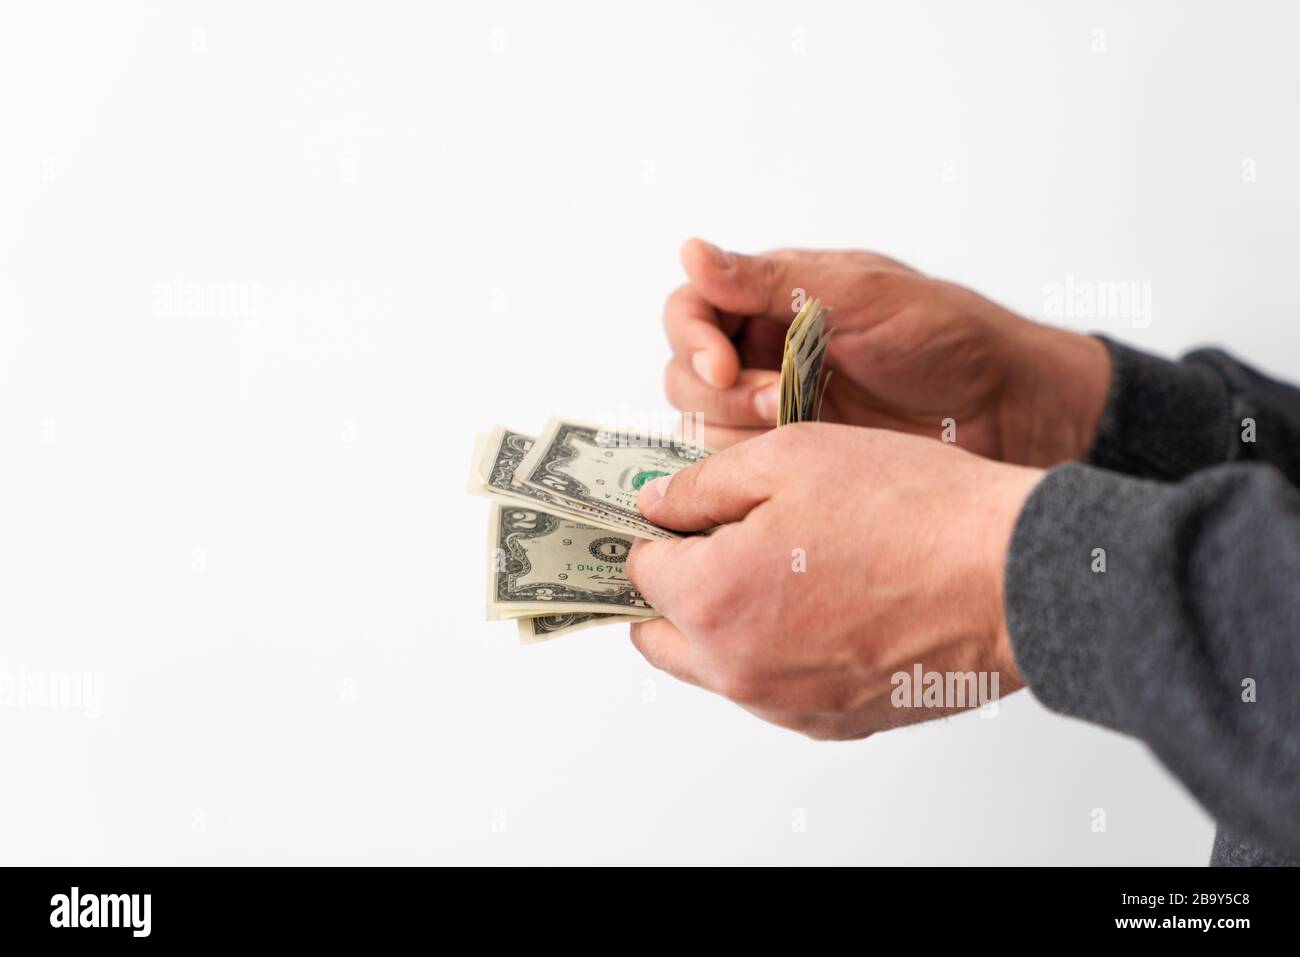 Hands are counting cash money for taking from or giving to someone. financial, payment concept Stock Photo